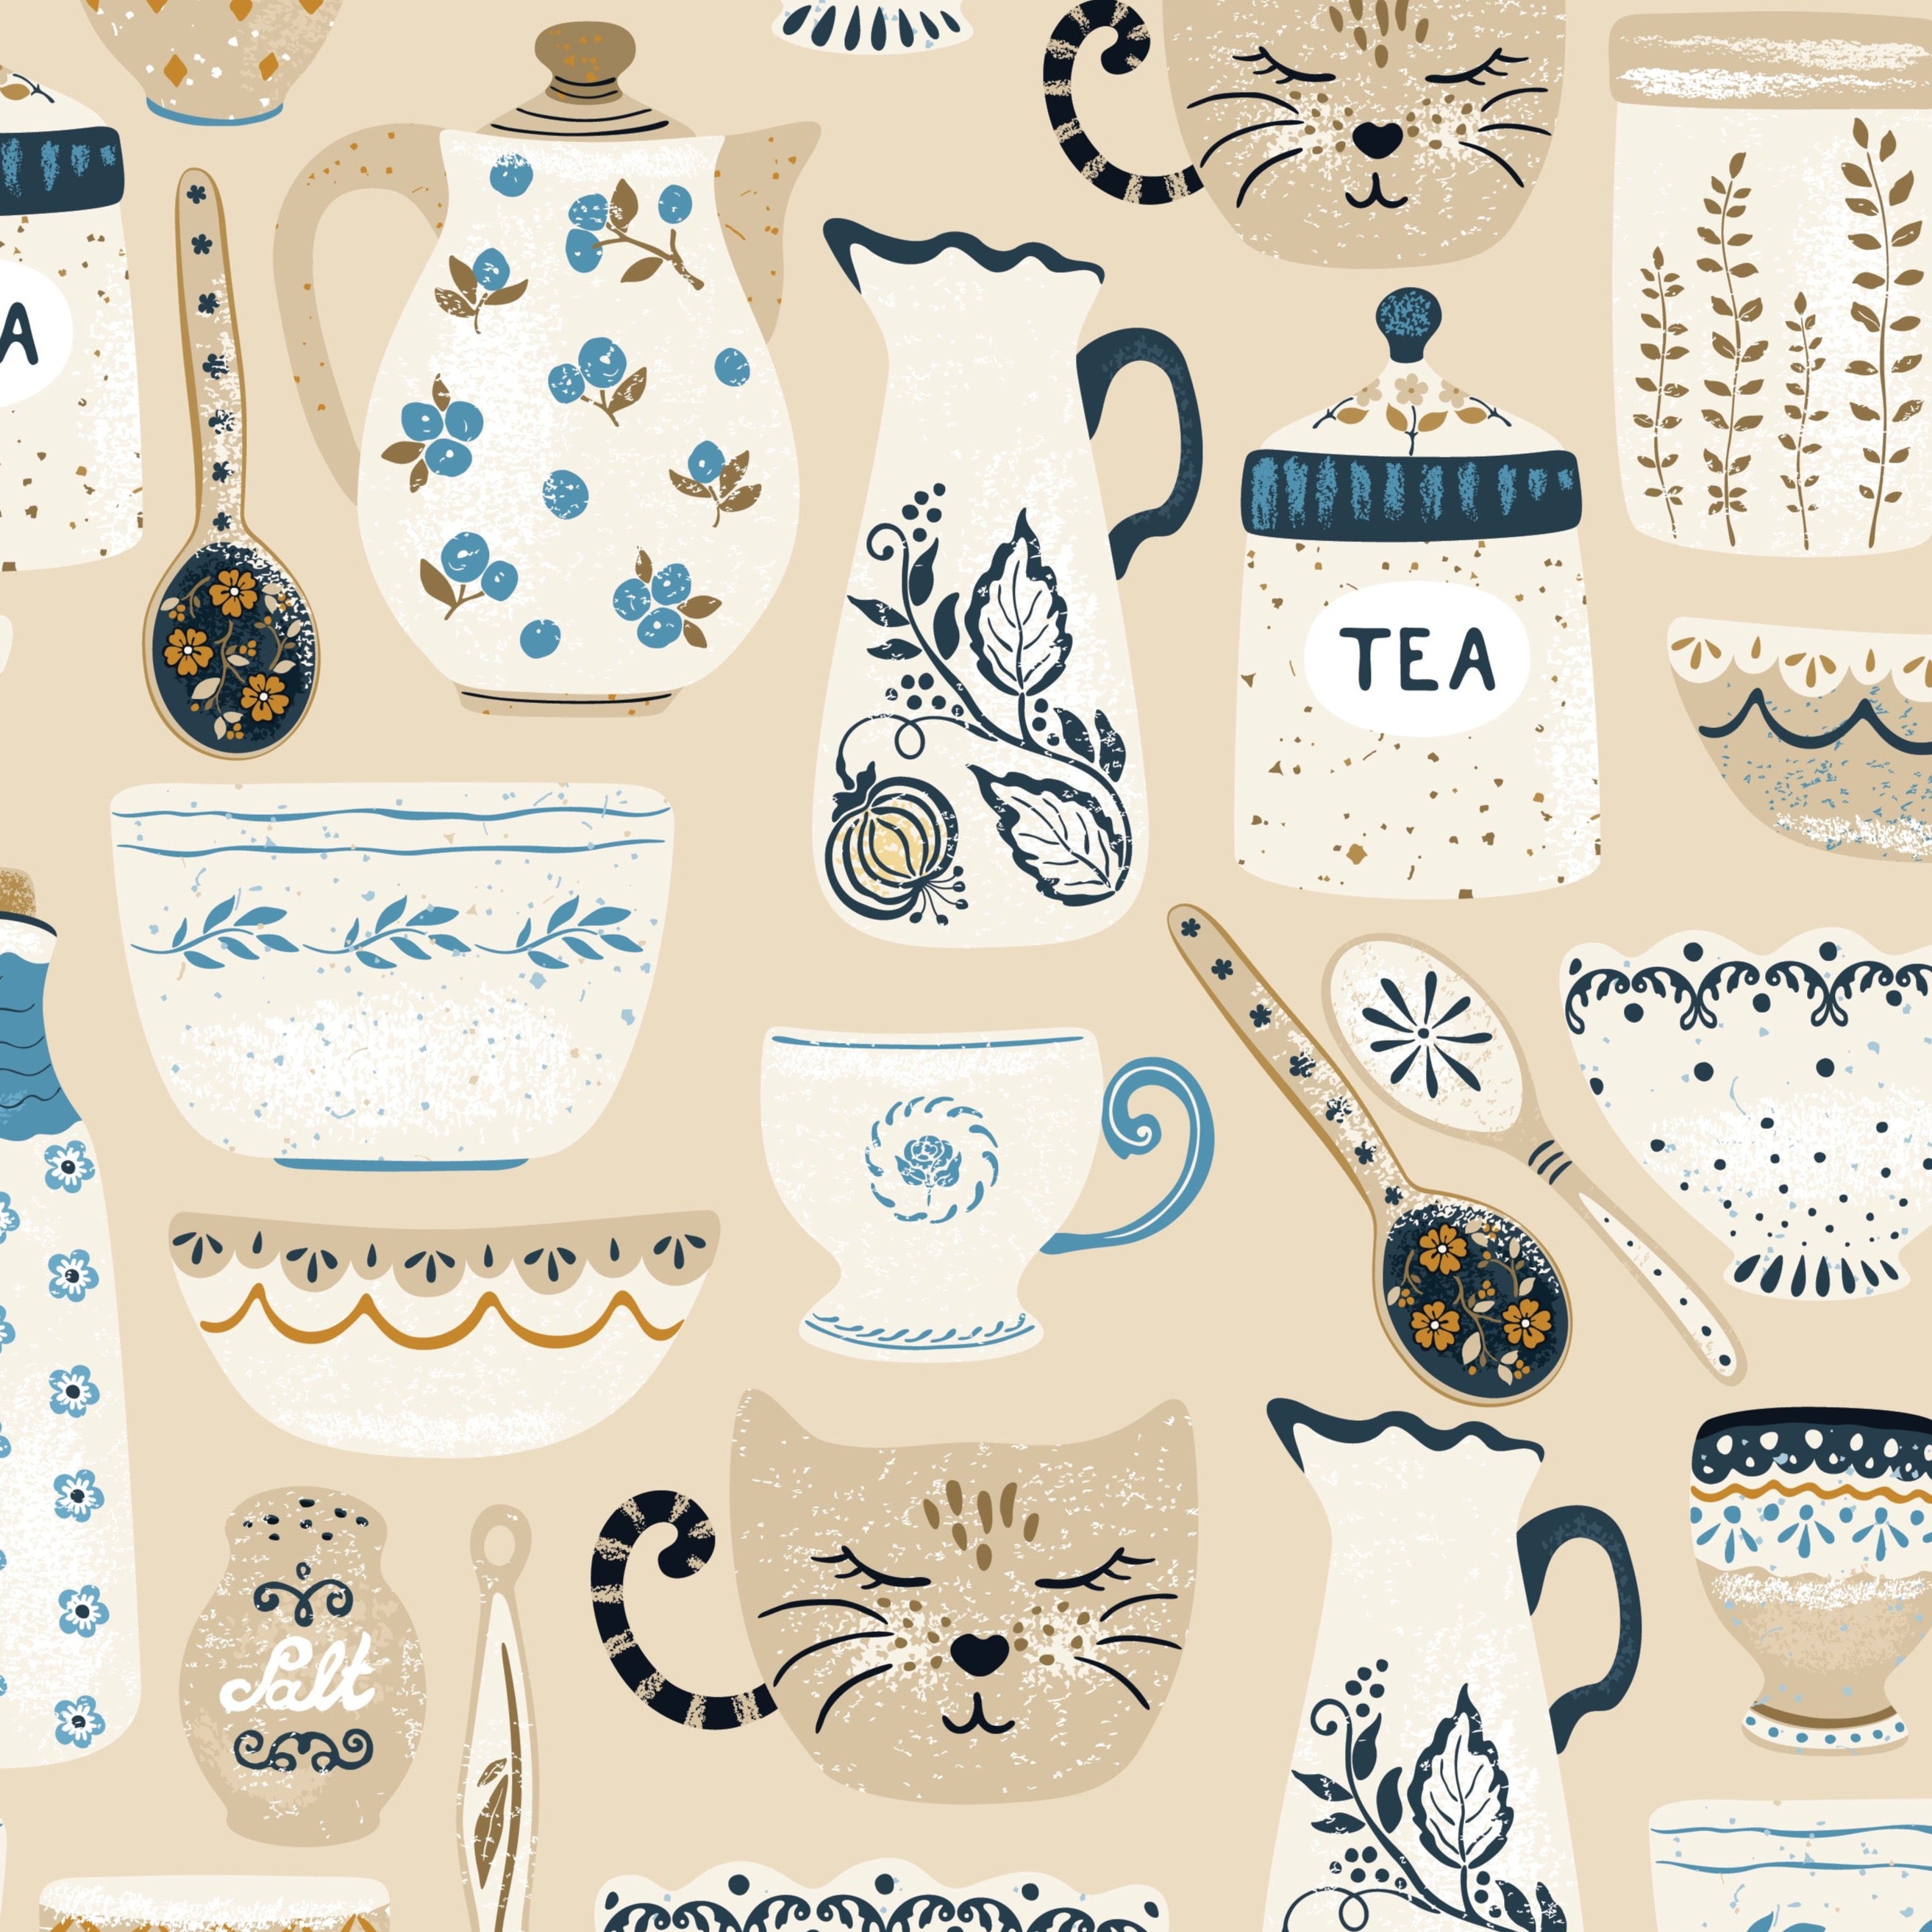 Close-up of the 'Spring Ceramics Wallpaper', showcasing a delightful pattern of illustrated ceramic teapots, teacups, and playful cat faces intertwined with floral motifs. The design uses a soft color palette of beige, blue, and yellow, contributing to a quaint and cheerful vibe.